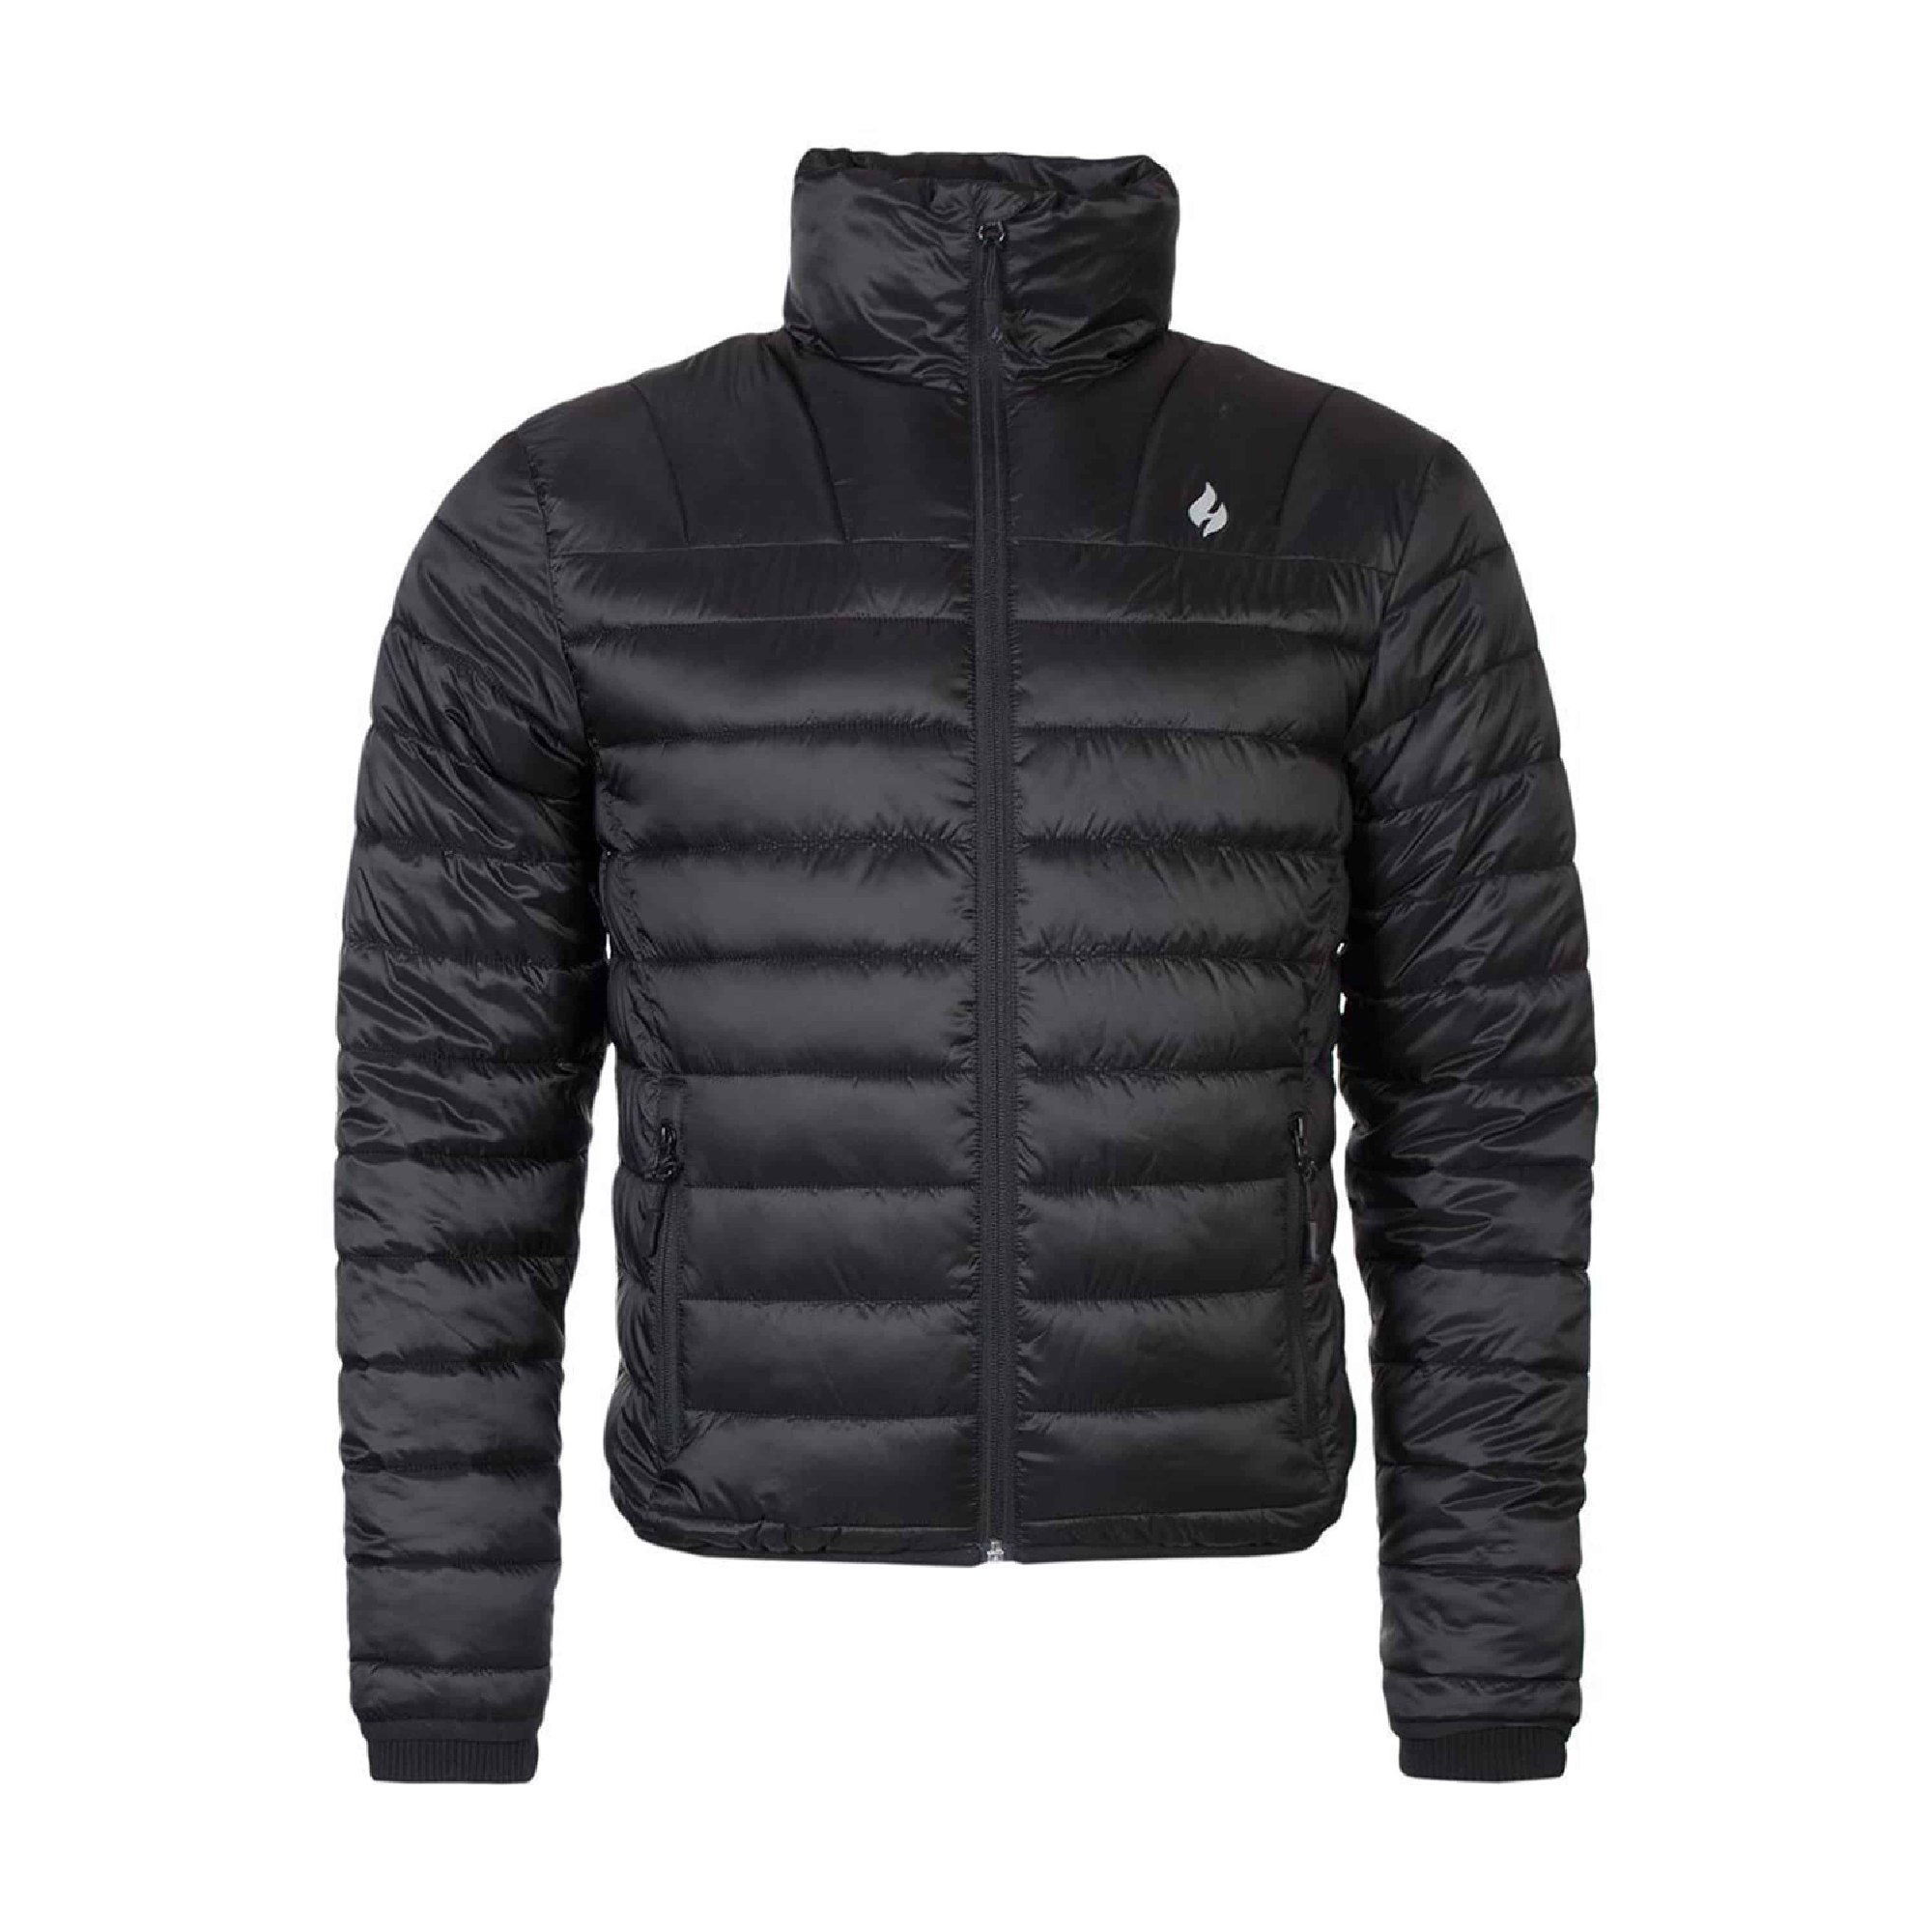 Heat Holders Mens Thermal Winter Fleece Lined Quilted Puffer Jacket